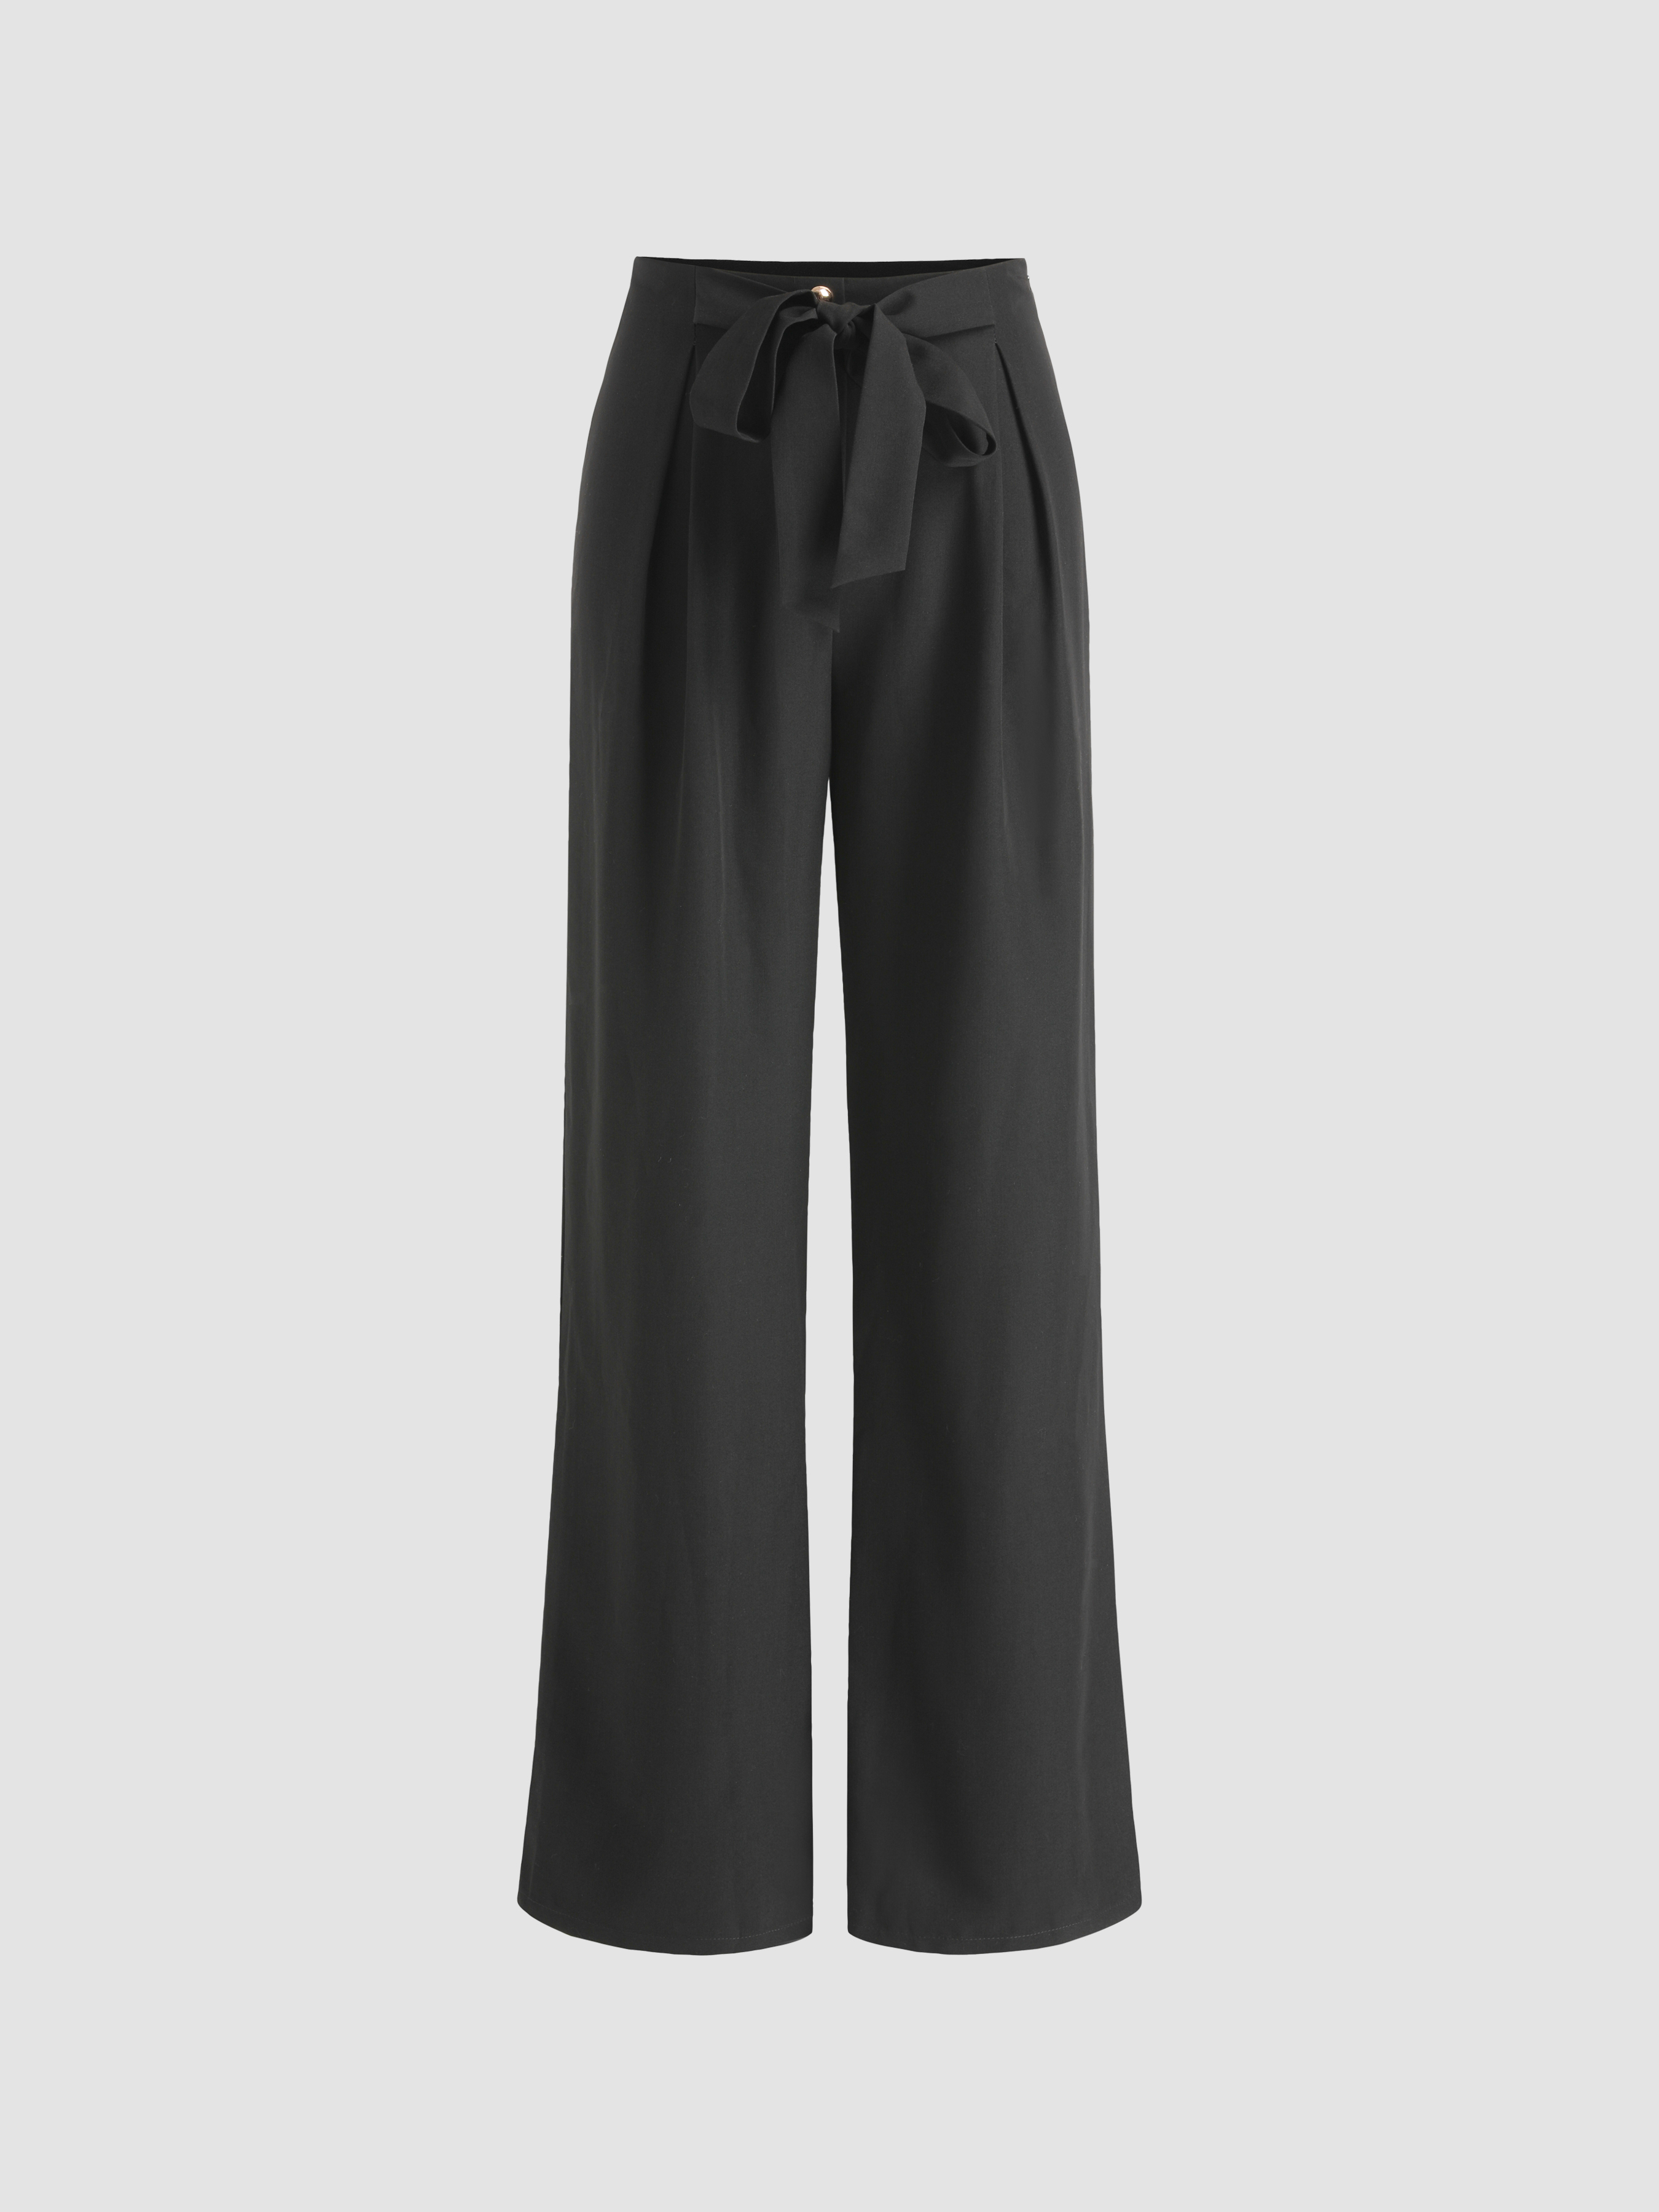 Bow Front Solid Pants - Cider